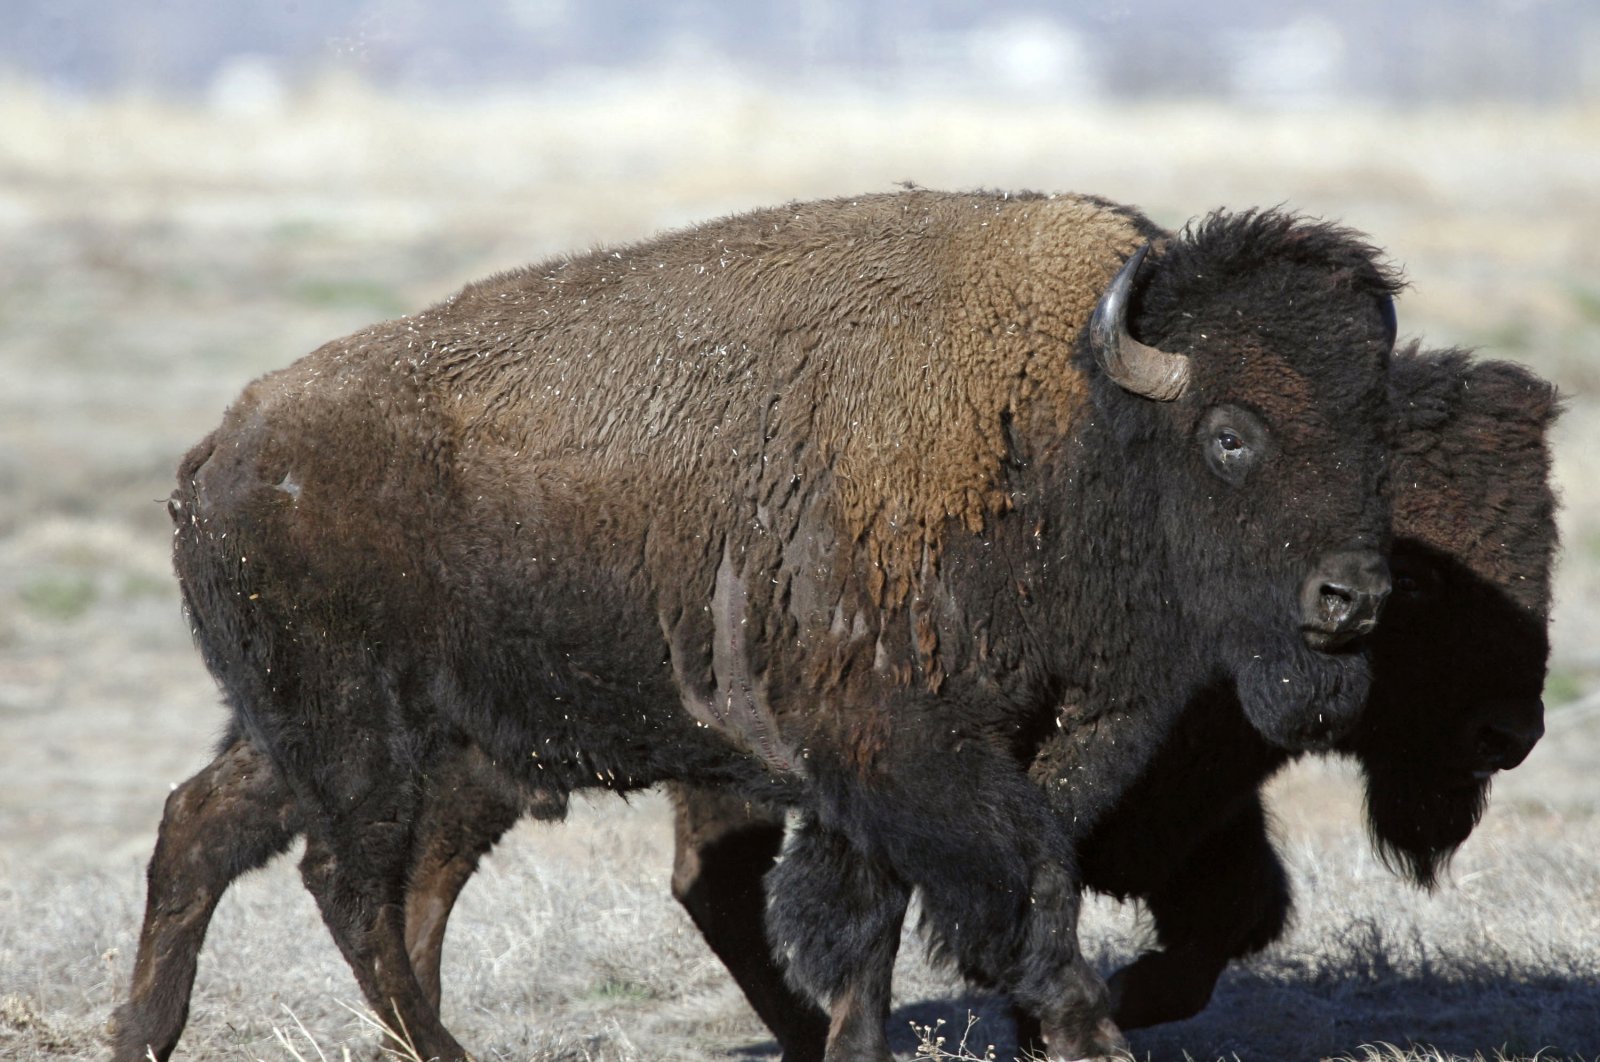 A pair of American bison head to their new home on the Rocky Mountain Arsenal National Wildlife Refuge in the northeast Denver suburb of Commerce City, Colorado, U.S., March 17, 2007. (AP Photo)